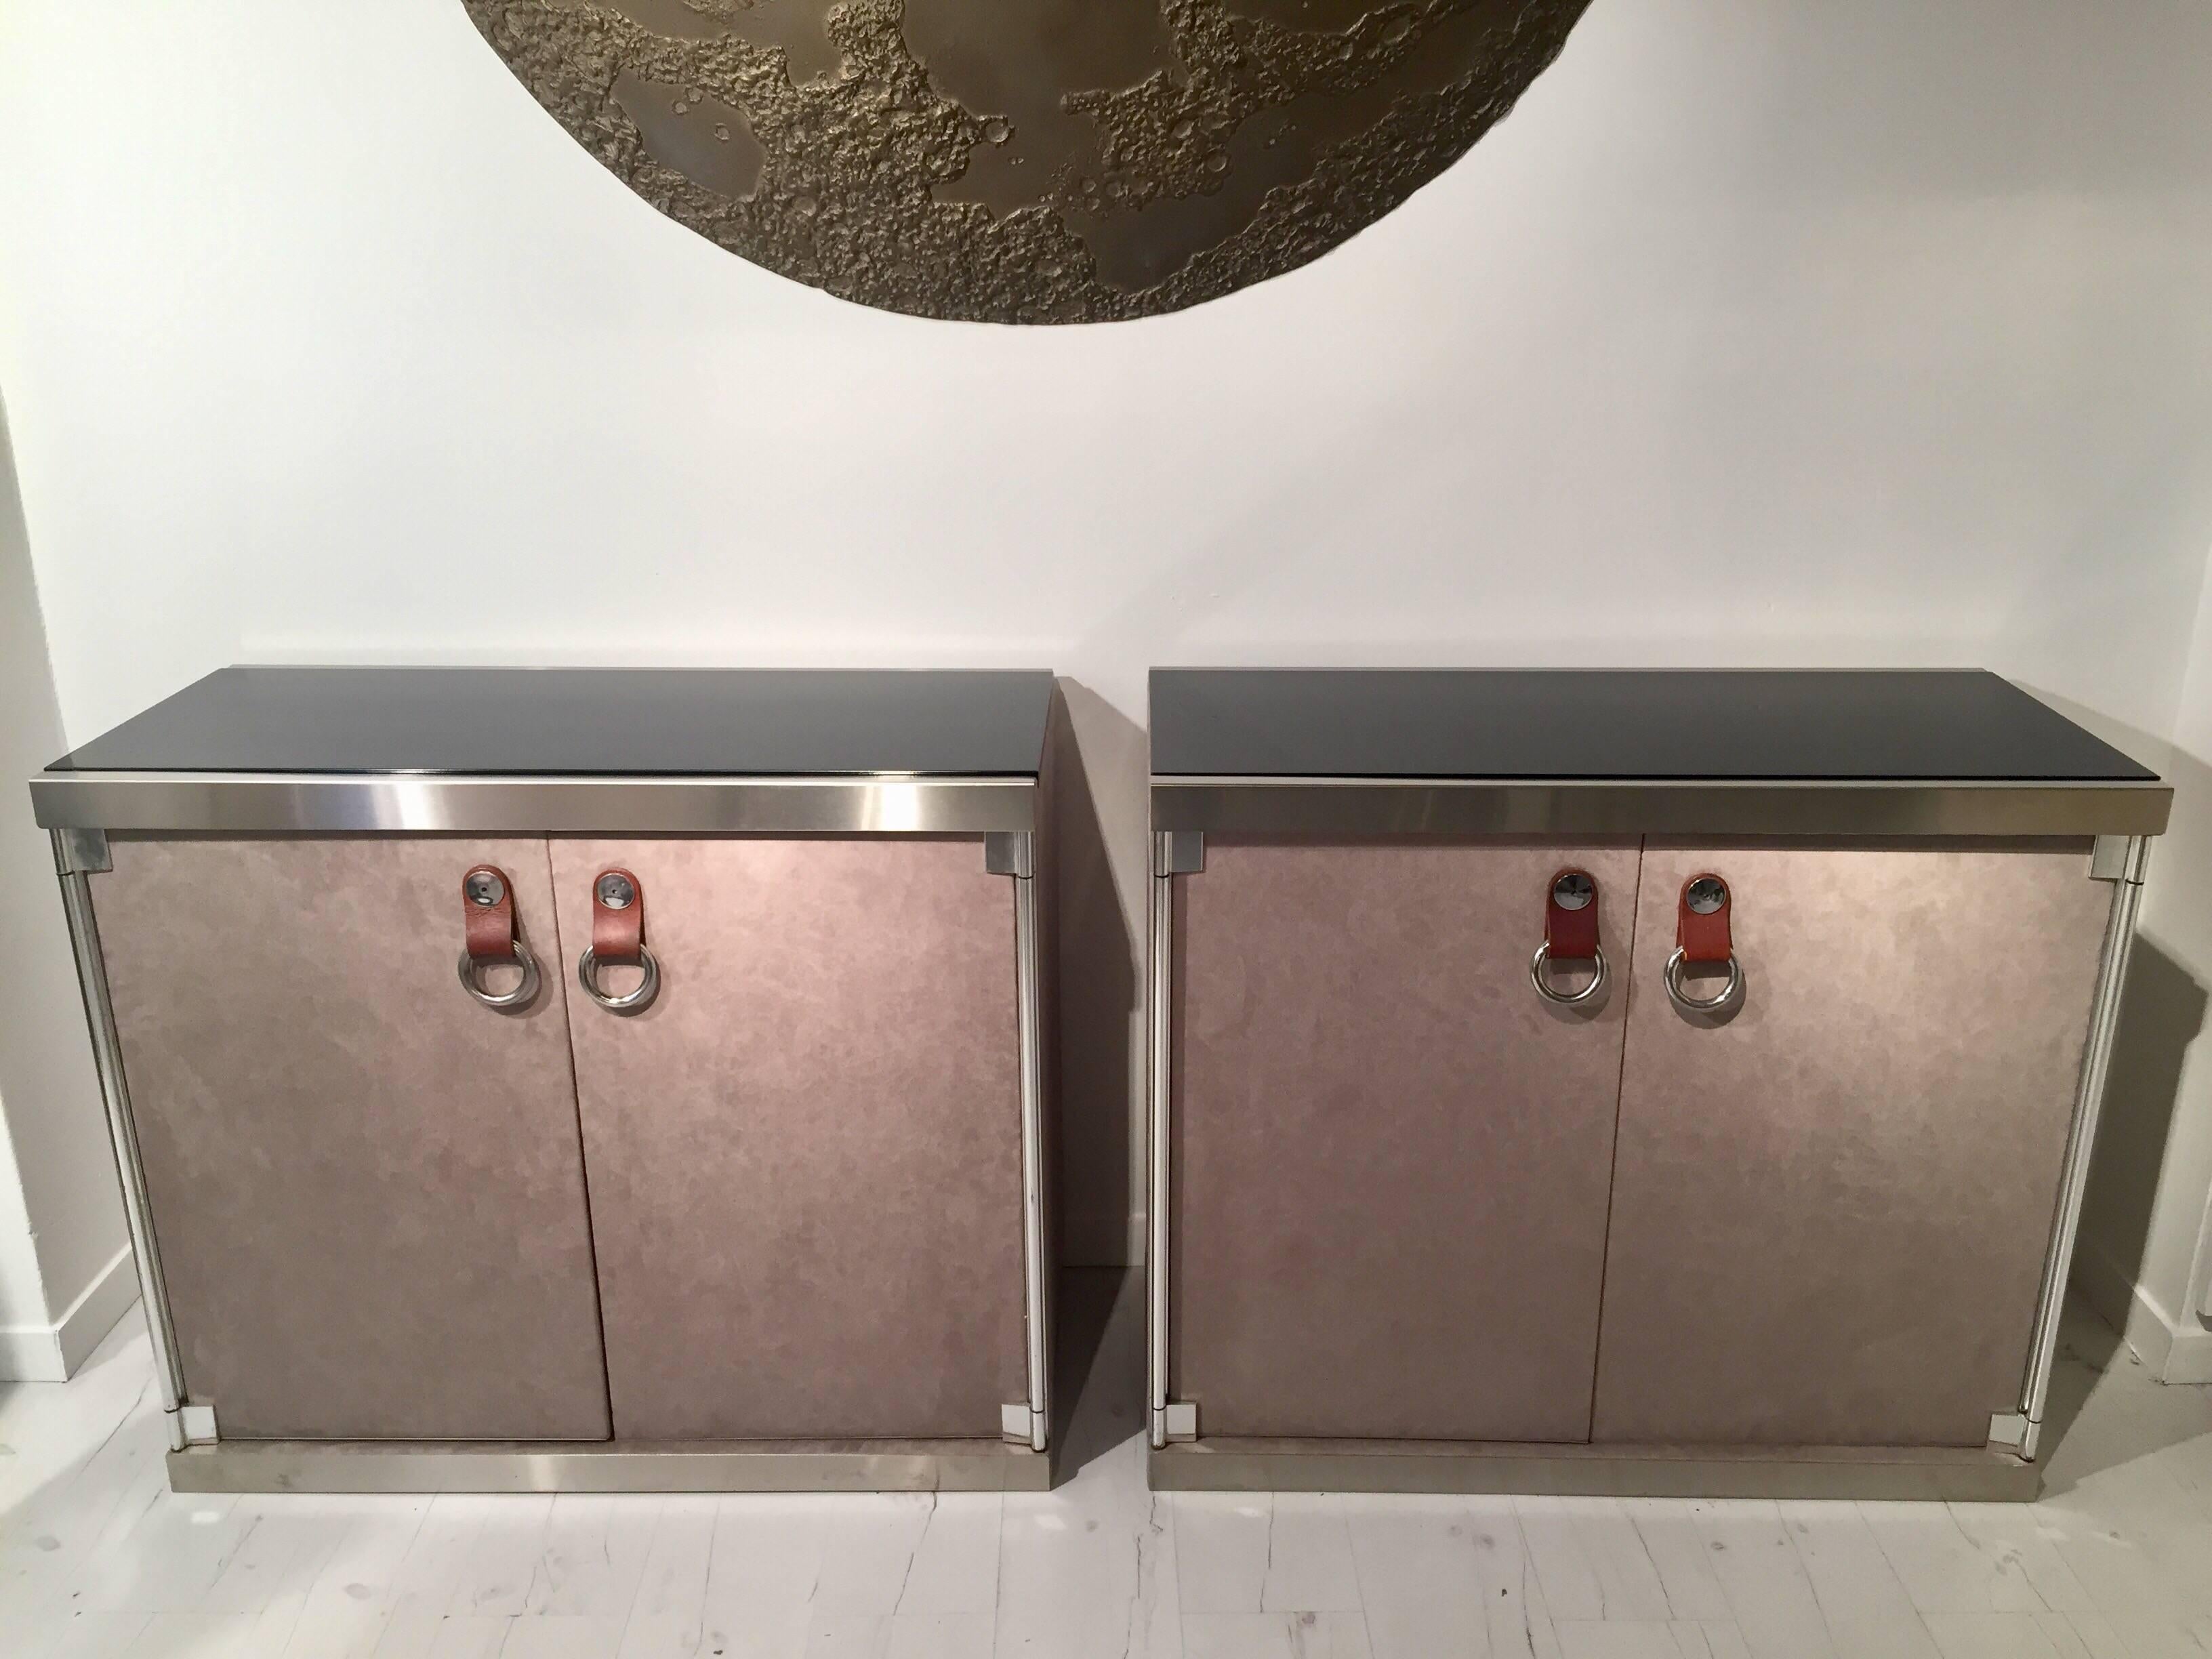 Pair of 1970s cabinets with suede look, leather handles and black lacquered top.
This cabinets were retailed By Hermes in 1970s-1980s.
Chromed steel details.
Perfect condition.